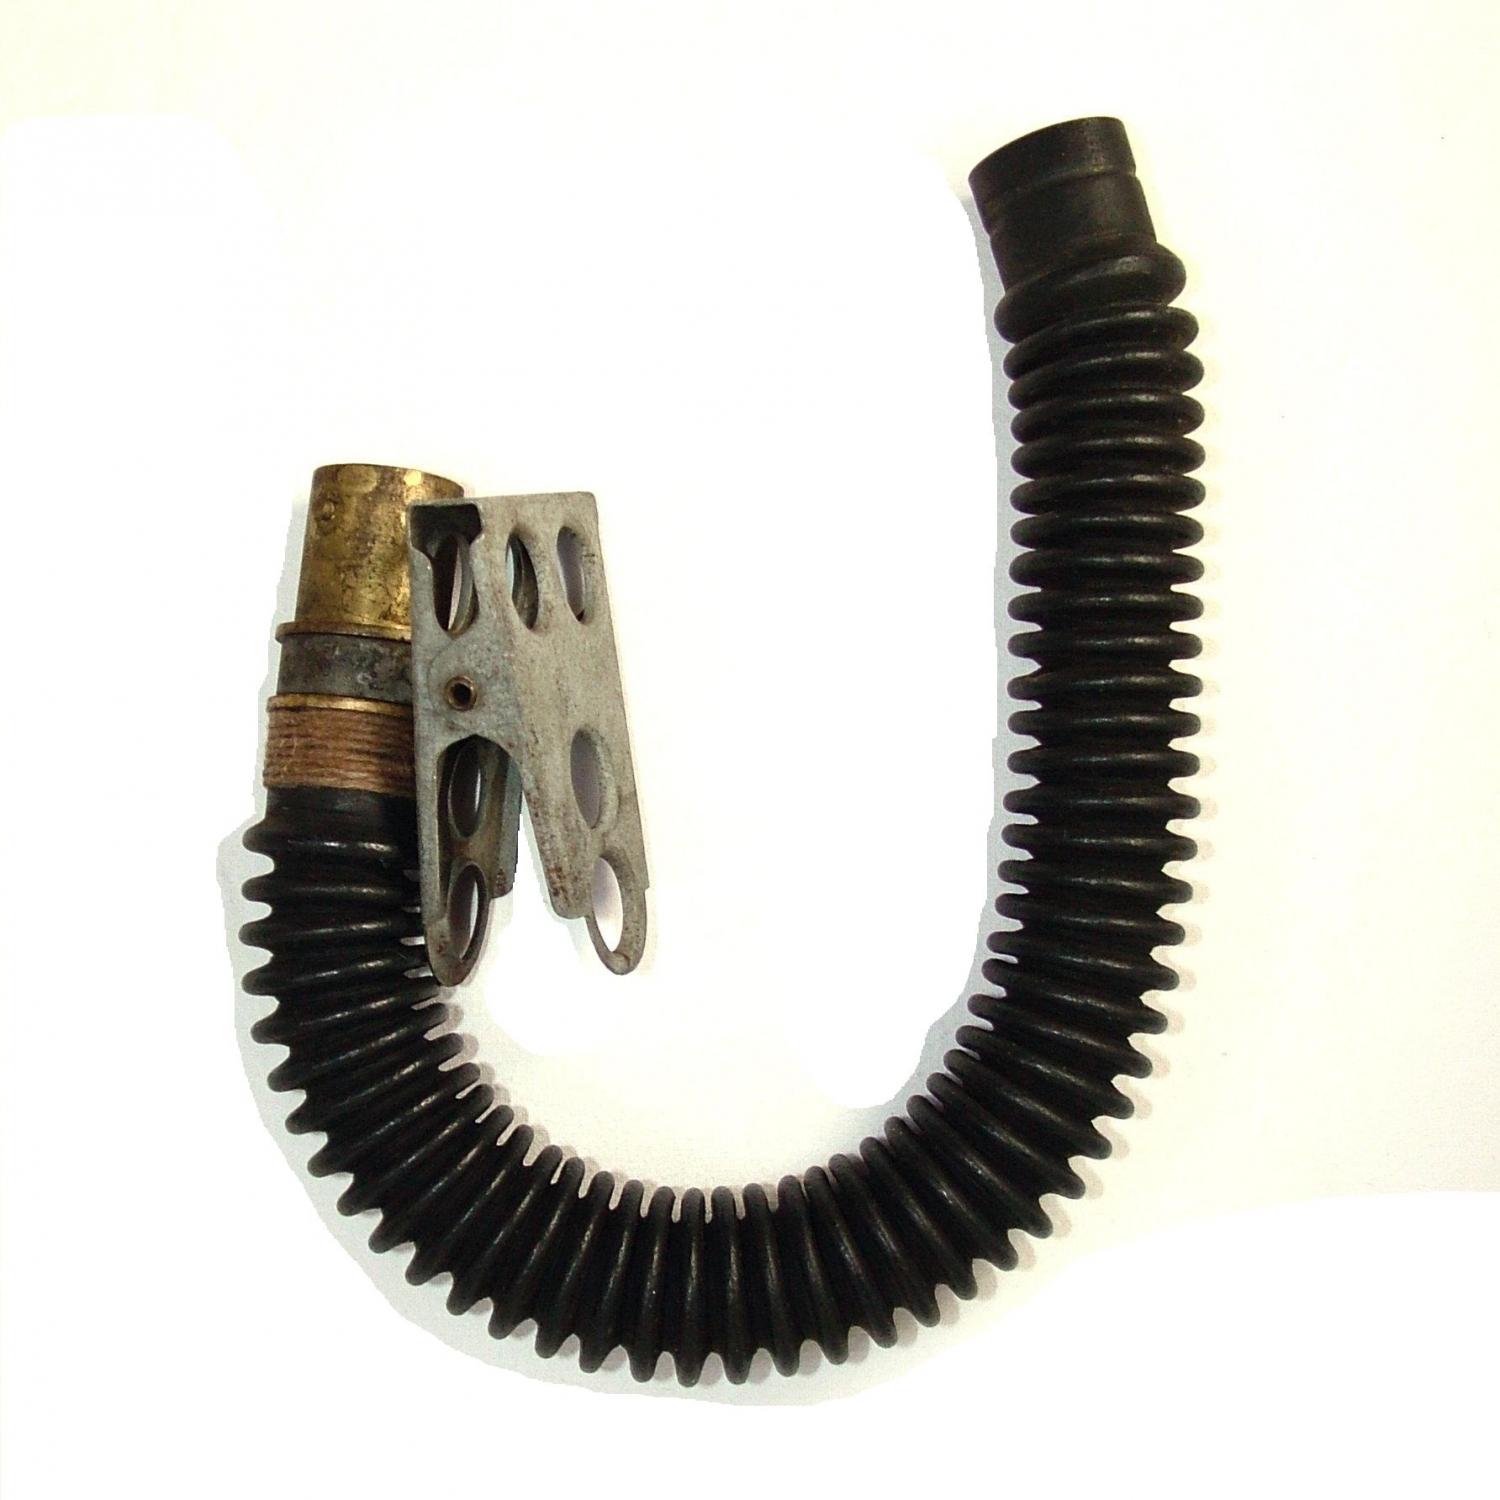 RAF Oxygen Mask Tube/Connectors - Early